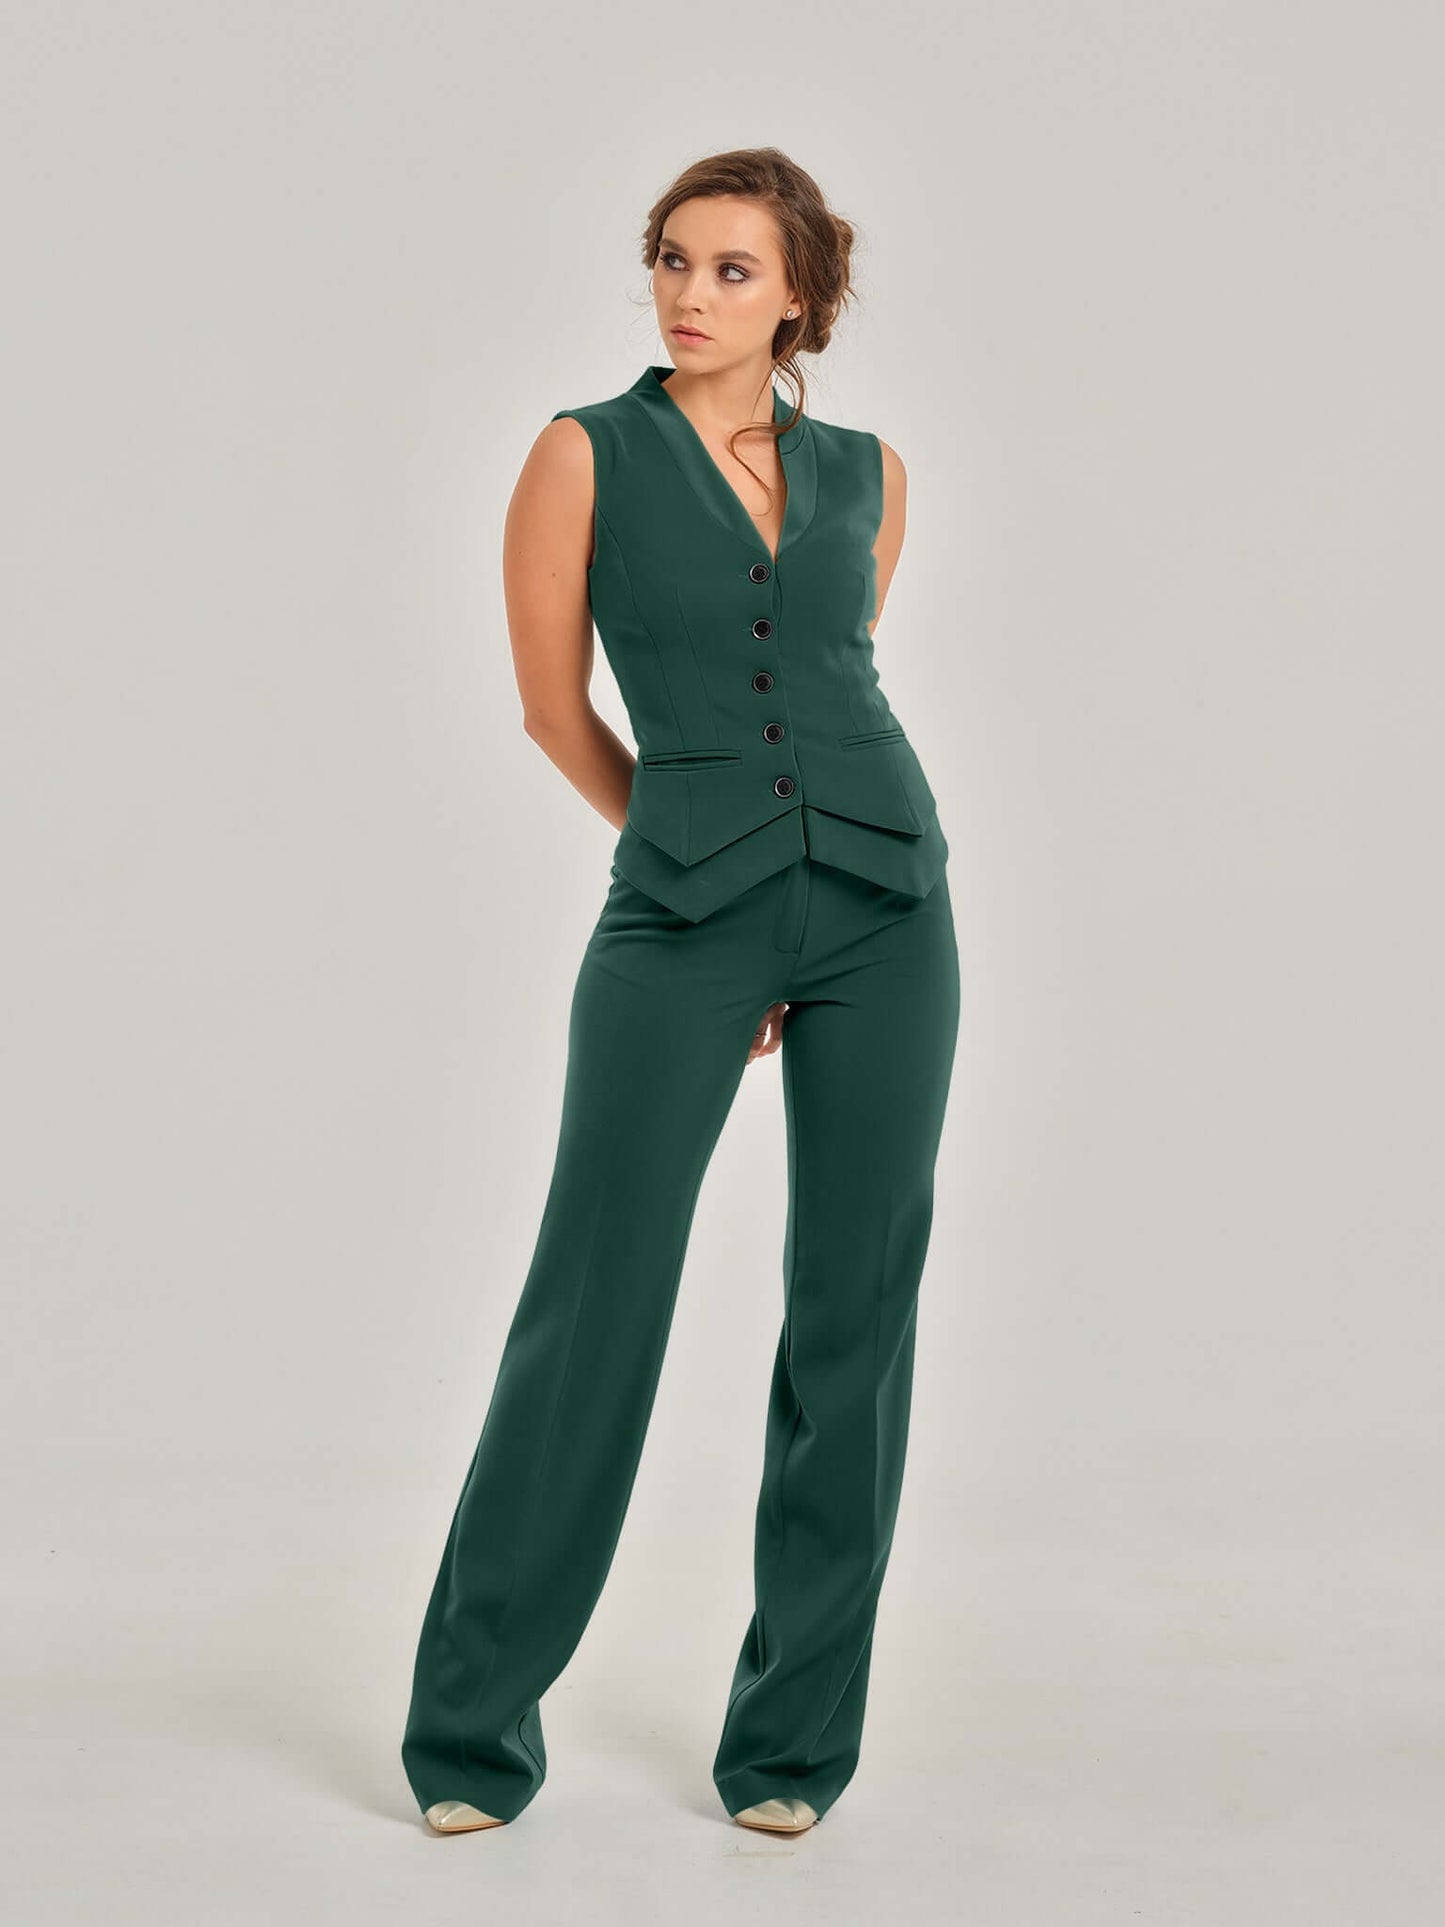 Emerald Dream Fitted Single-Breasted Waistcoat by Tia Dorraine Women's Luxury Fashion Designer Clothing Brand